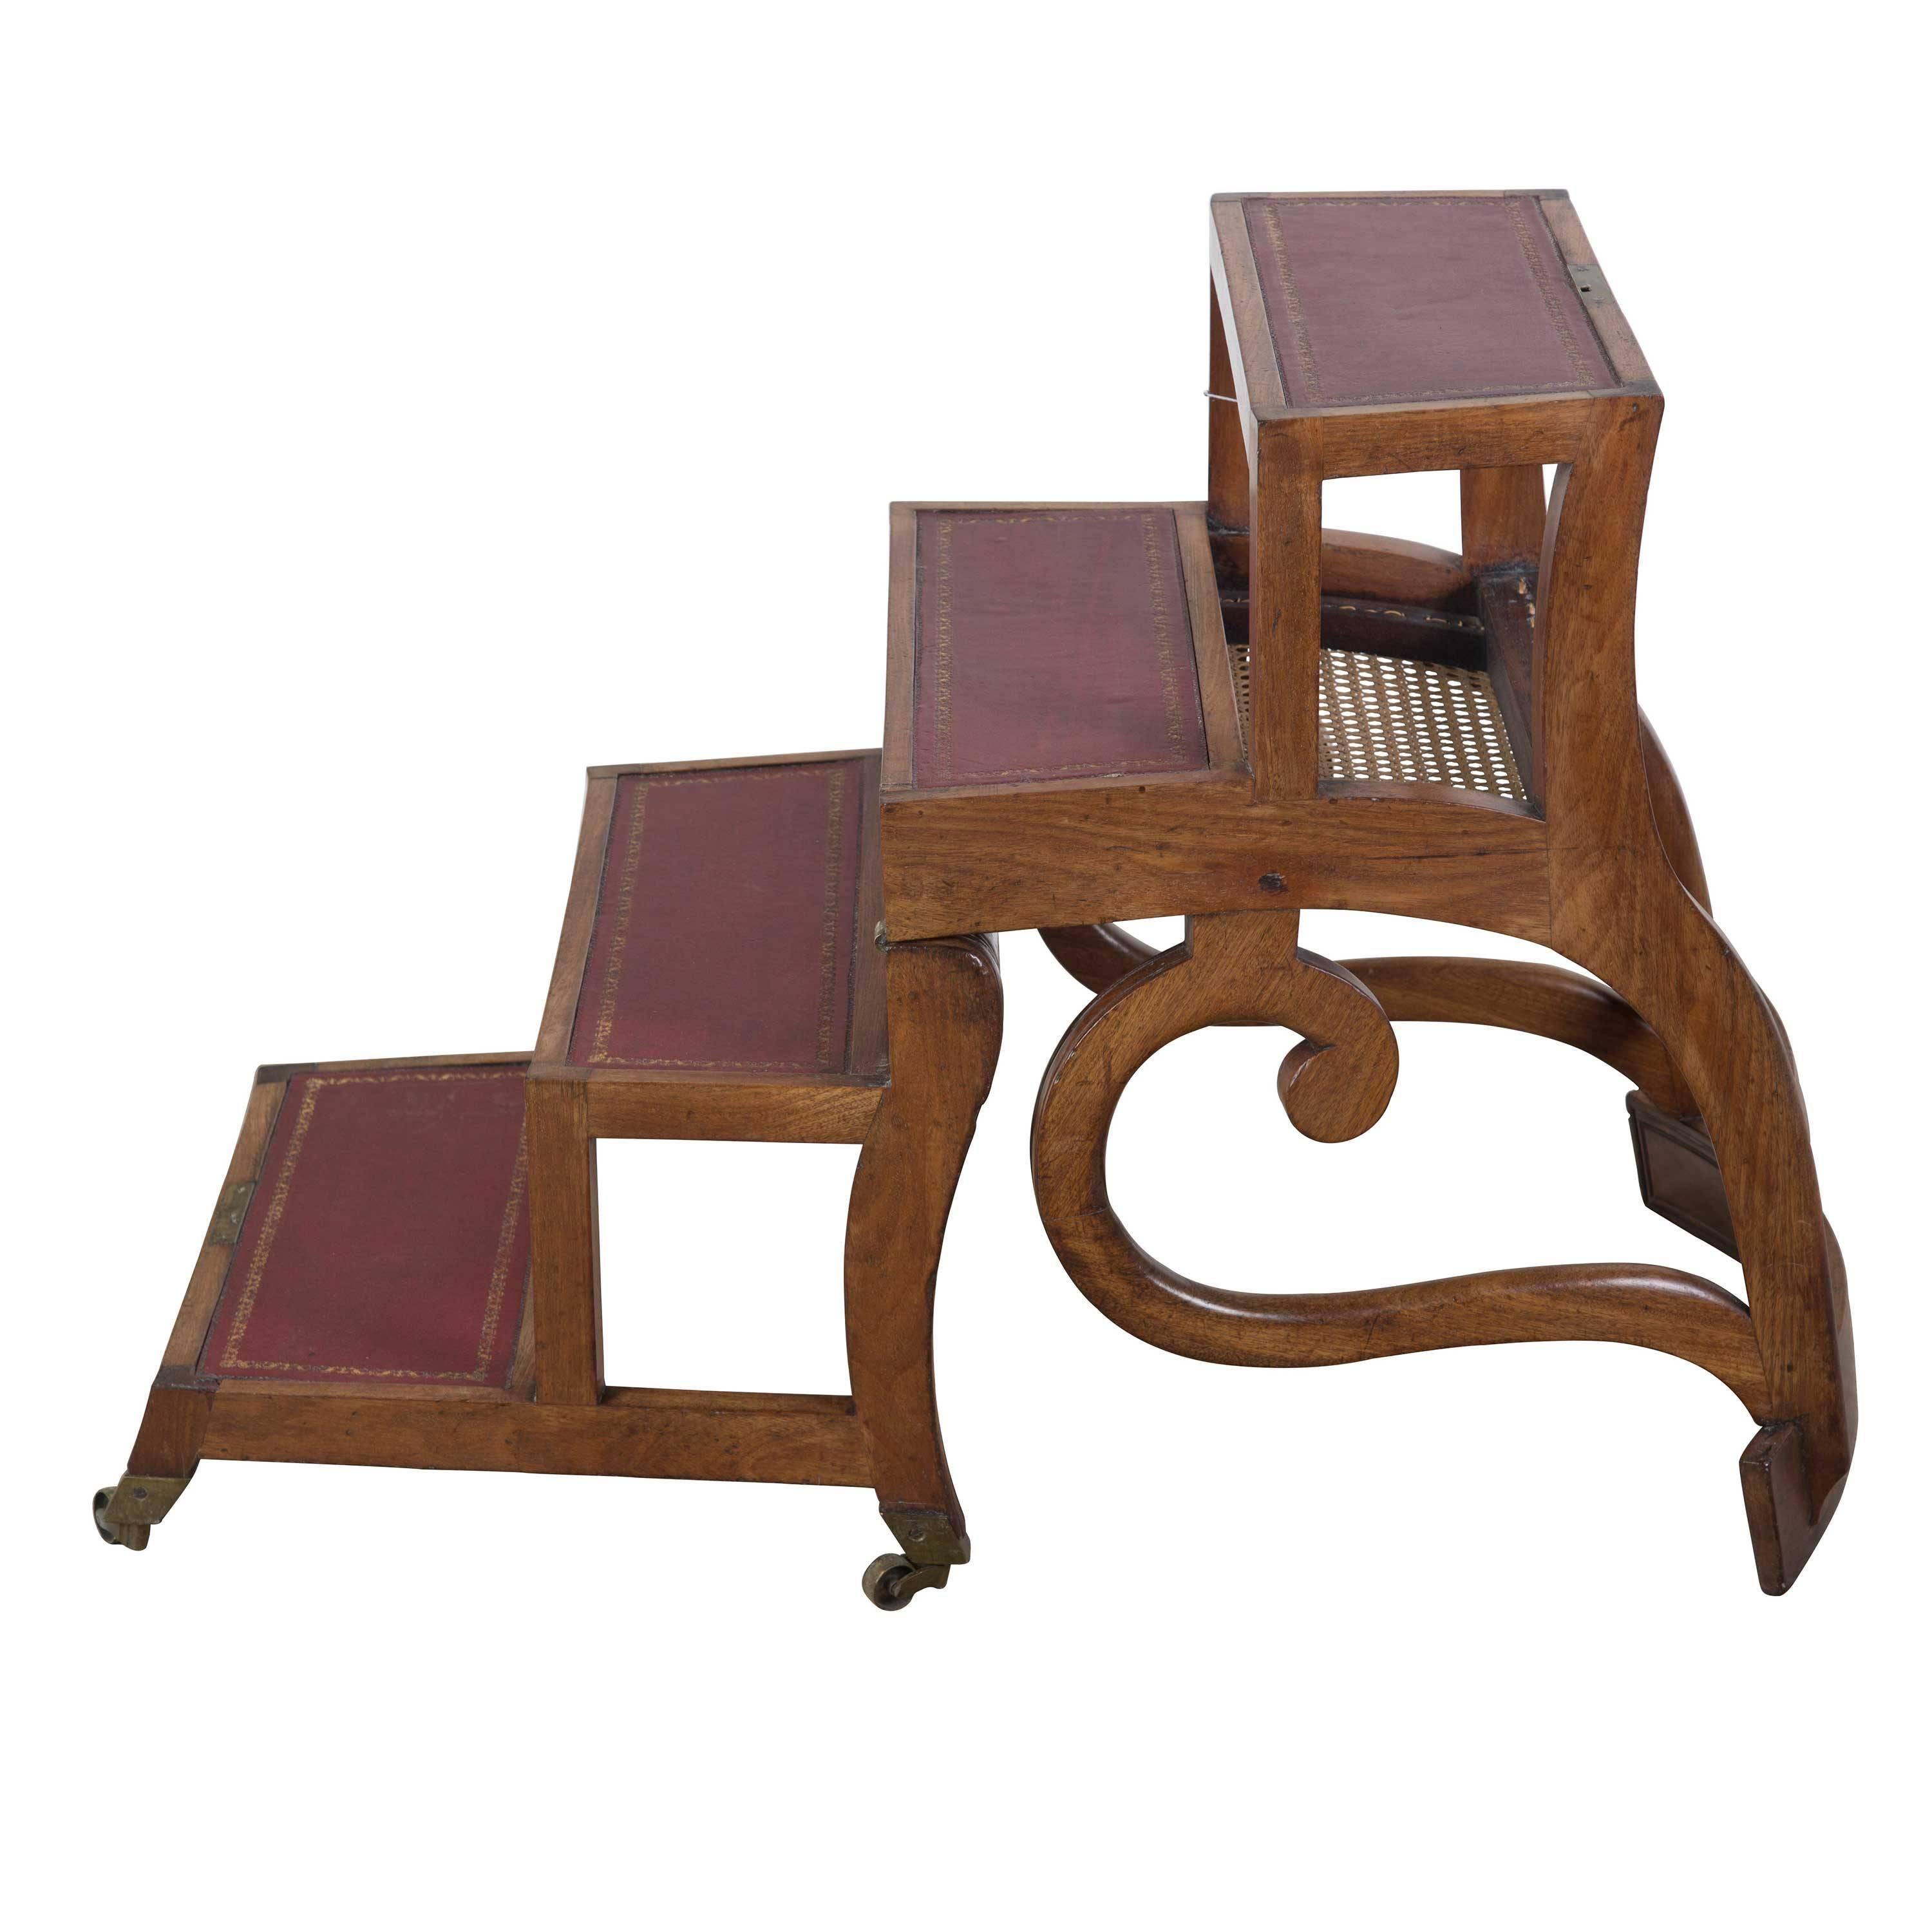 Well formed chair converting into library steps. Faded mahogany, England, circa 1820.

Measurements as steps:

Height 69 cm
Width 101 cm
Depth 54 cm.